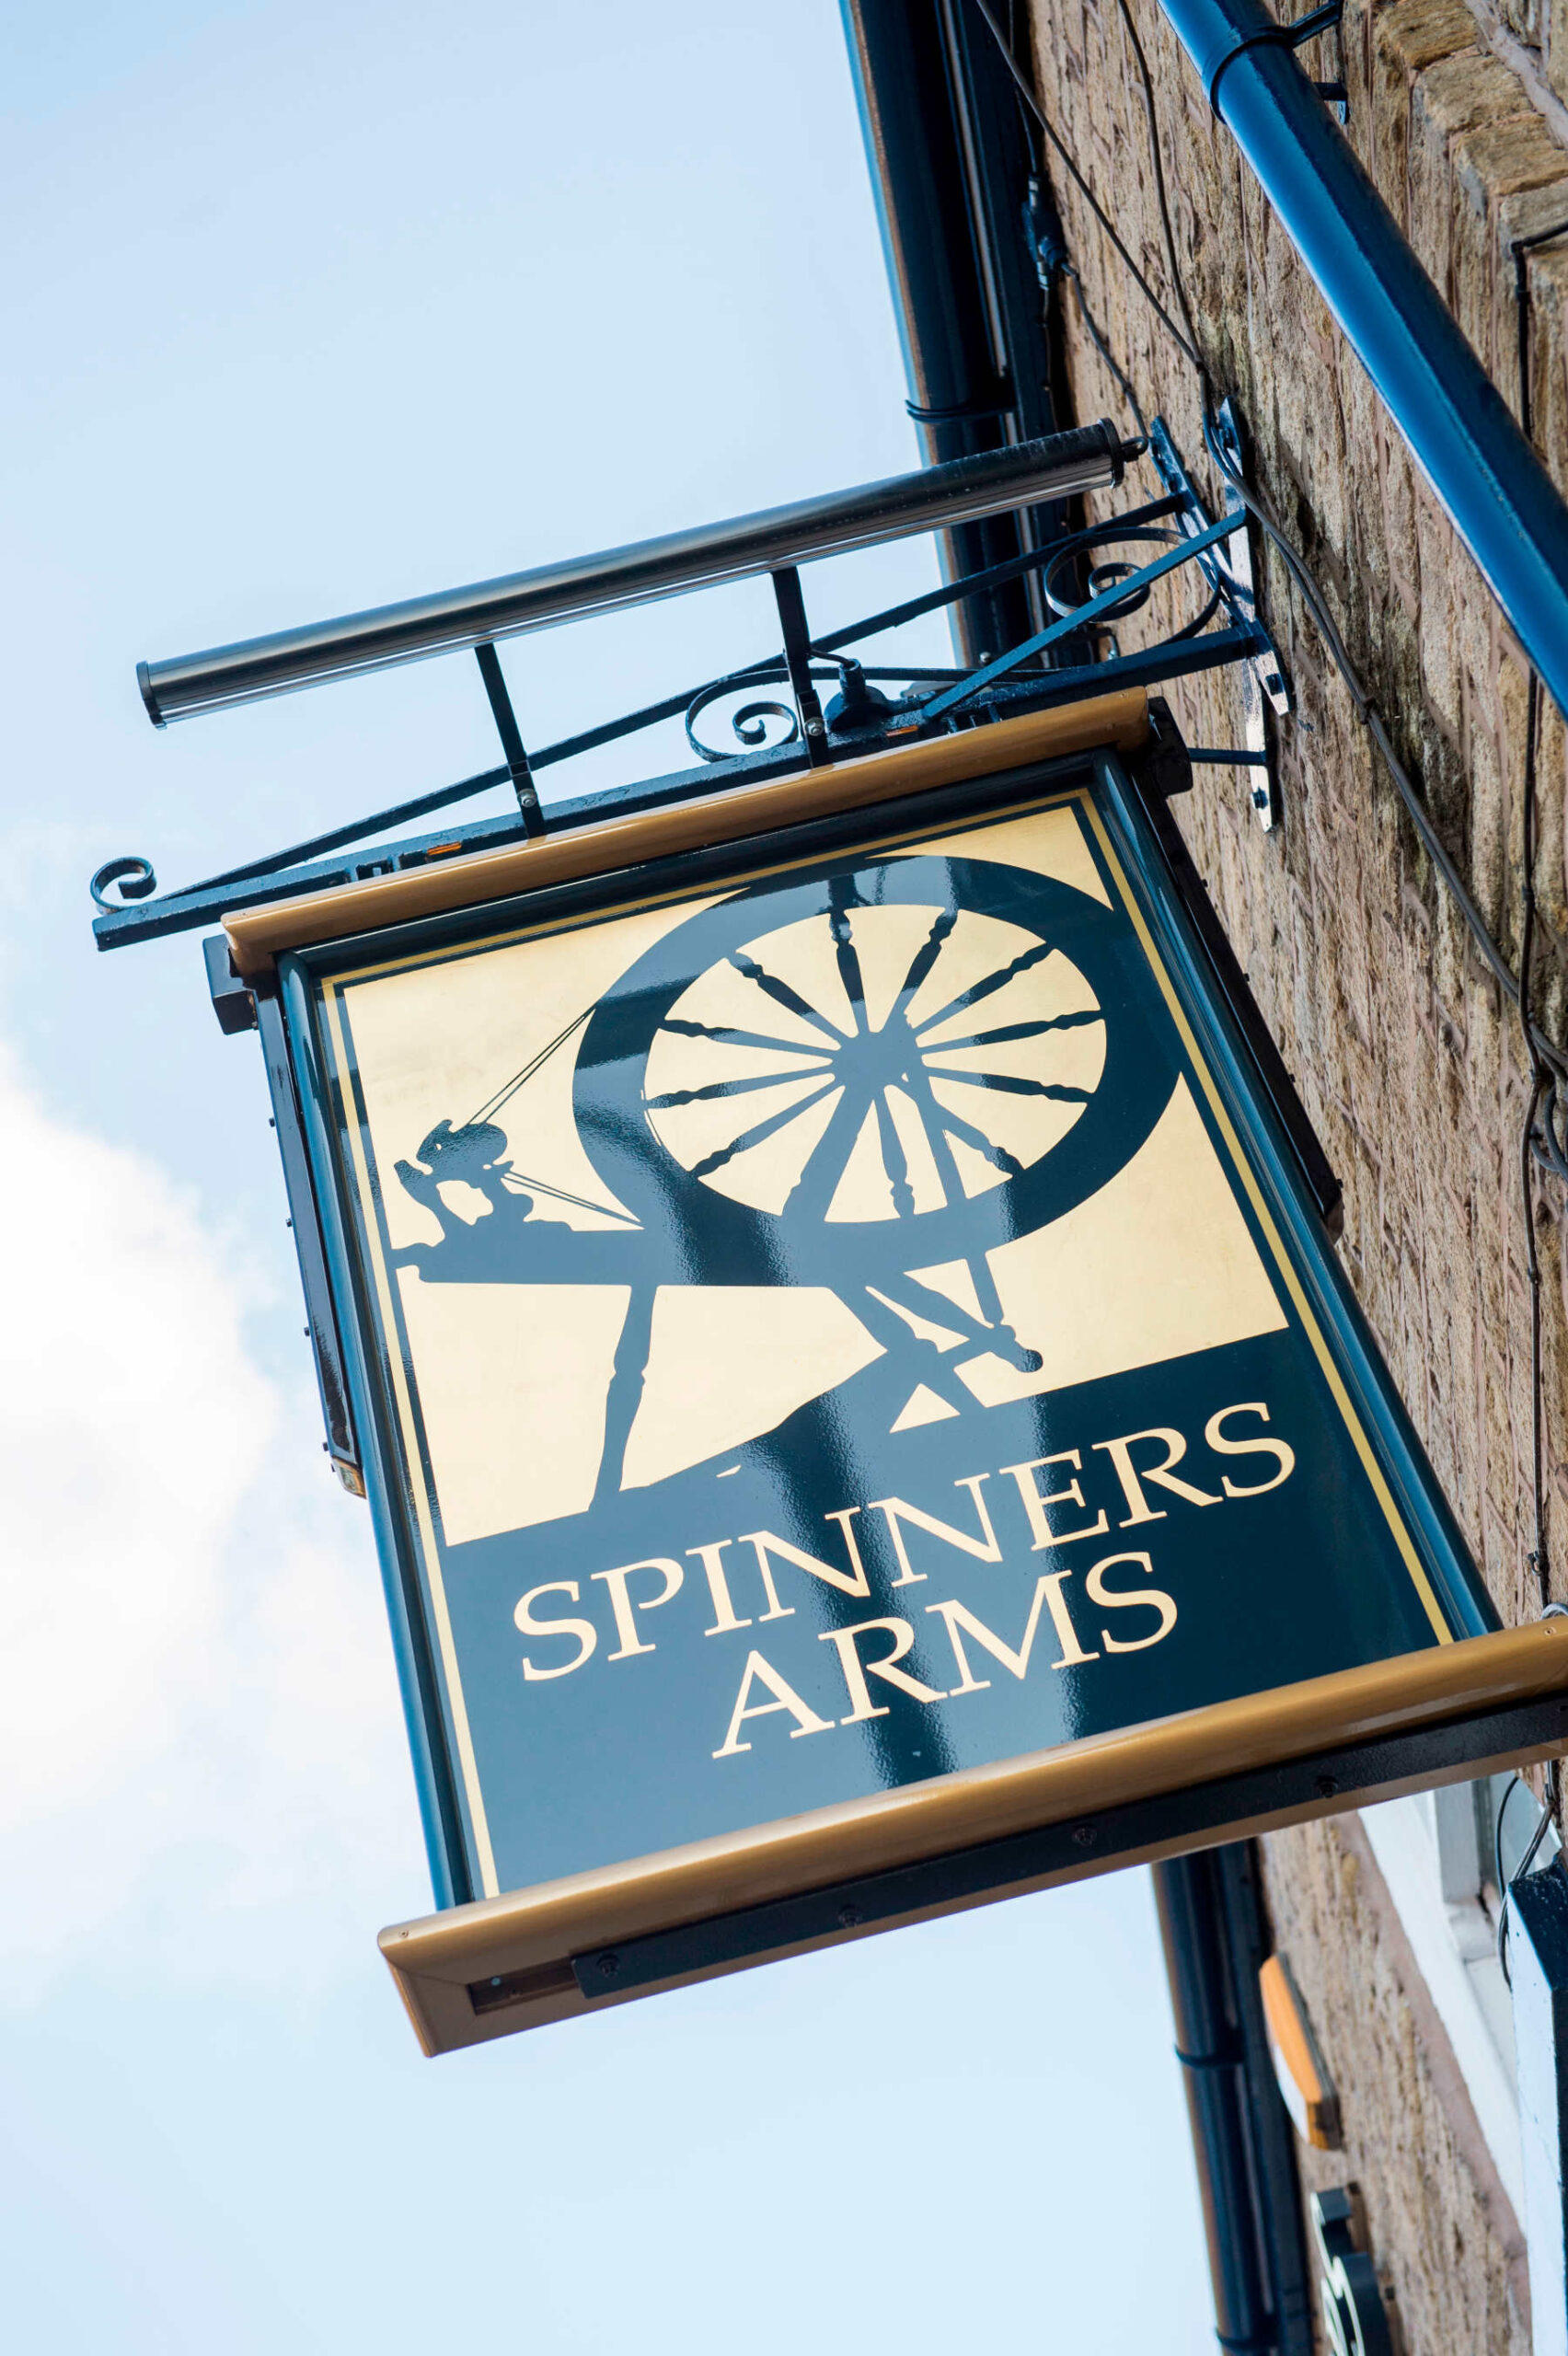 Spinners Arms Macclesfield 01625 576677